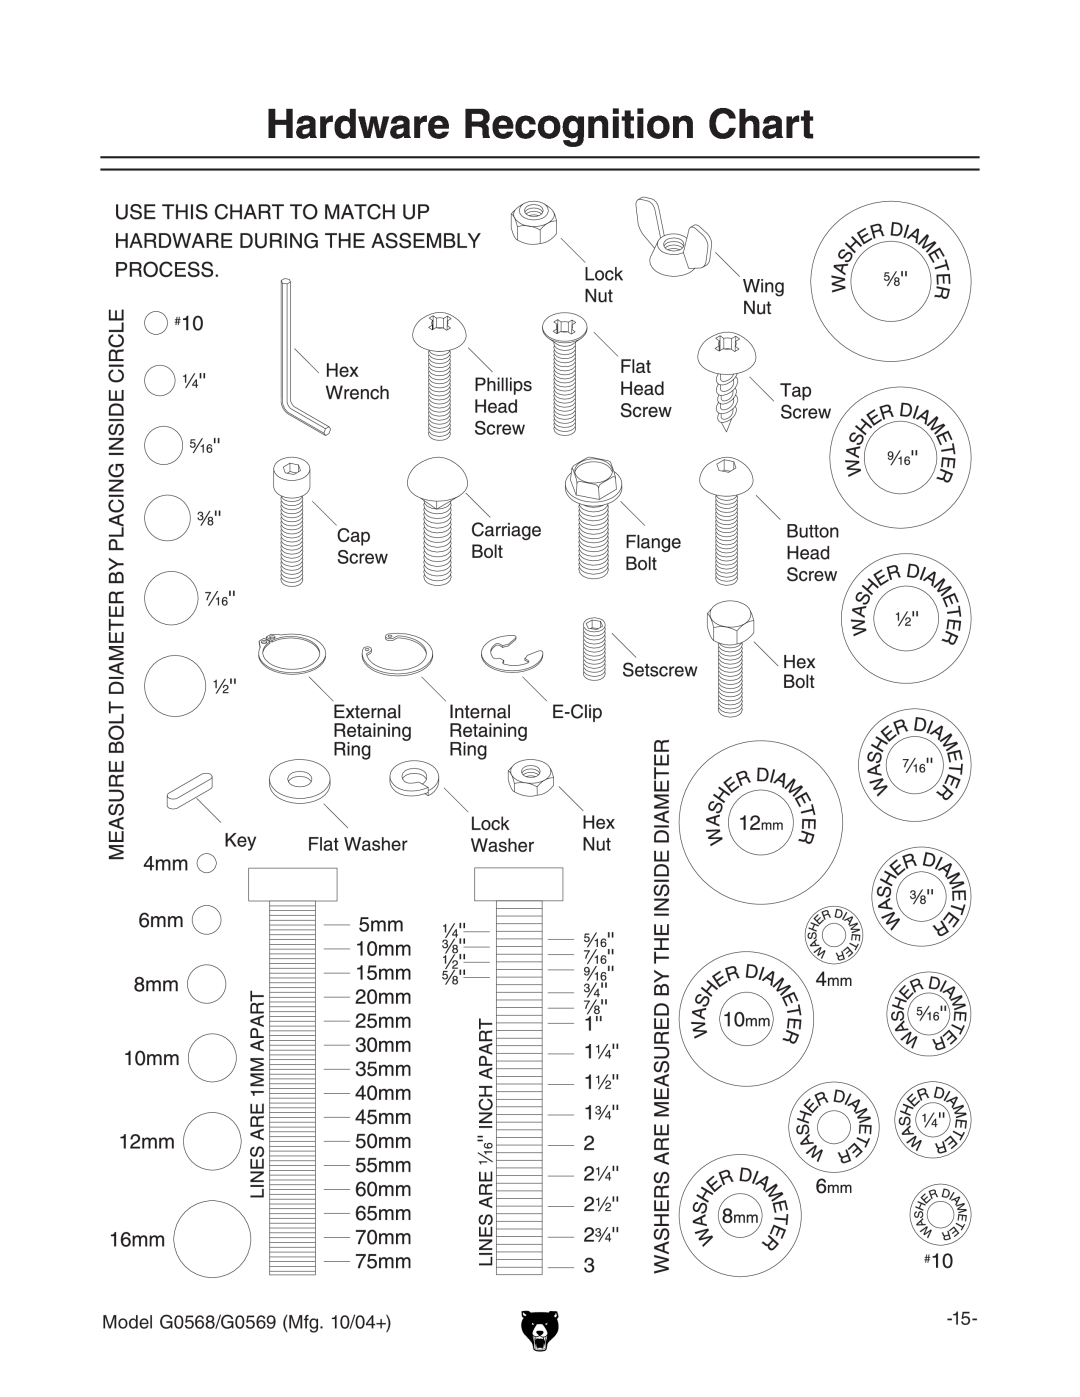 Grizzly G0568, G0569 owner manual Hardware Recognition Chart, BdYZa%*+-$%*+.B\#&%$%  